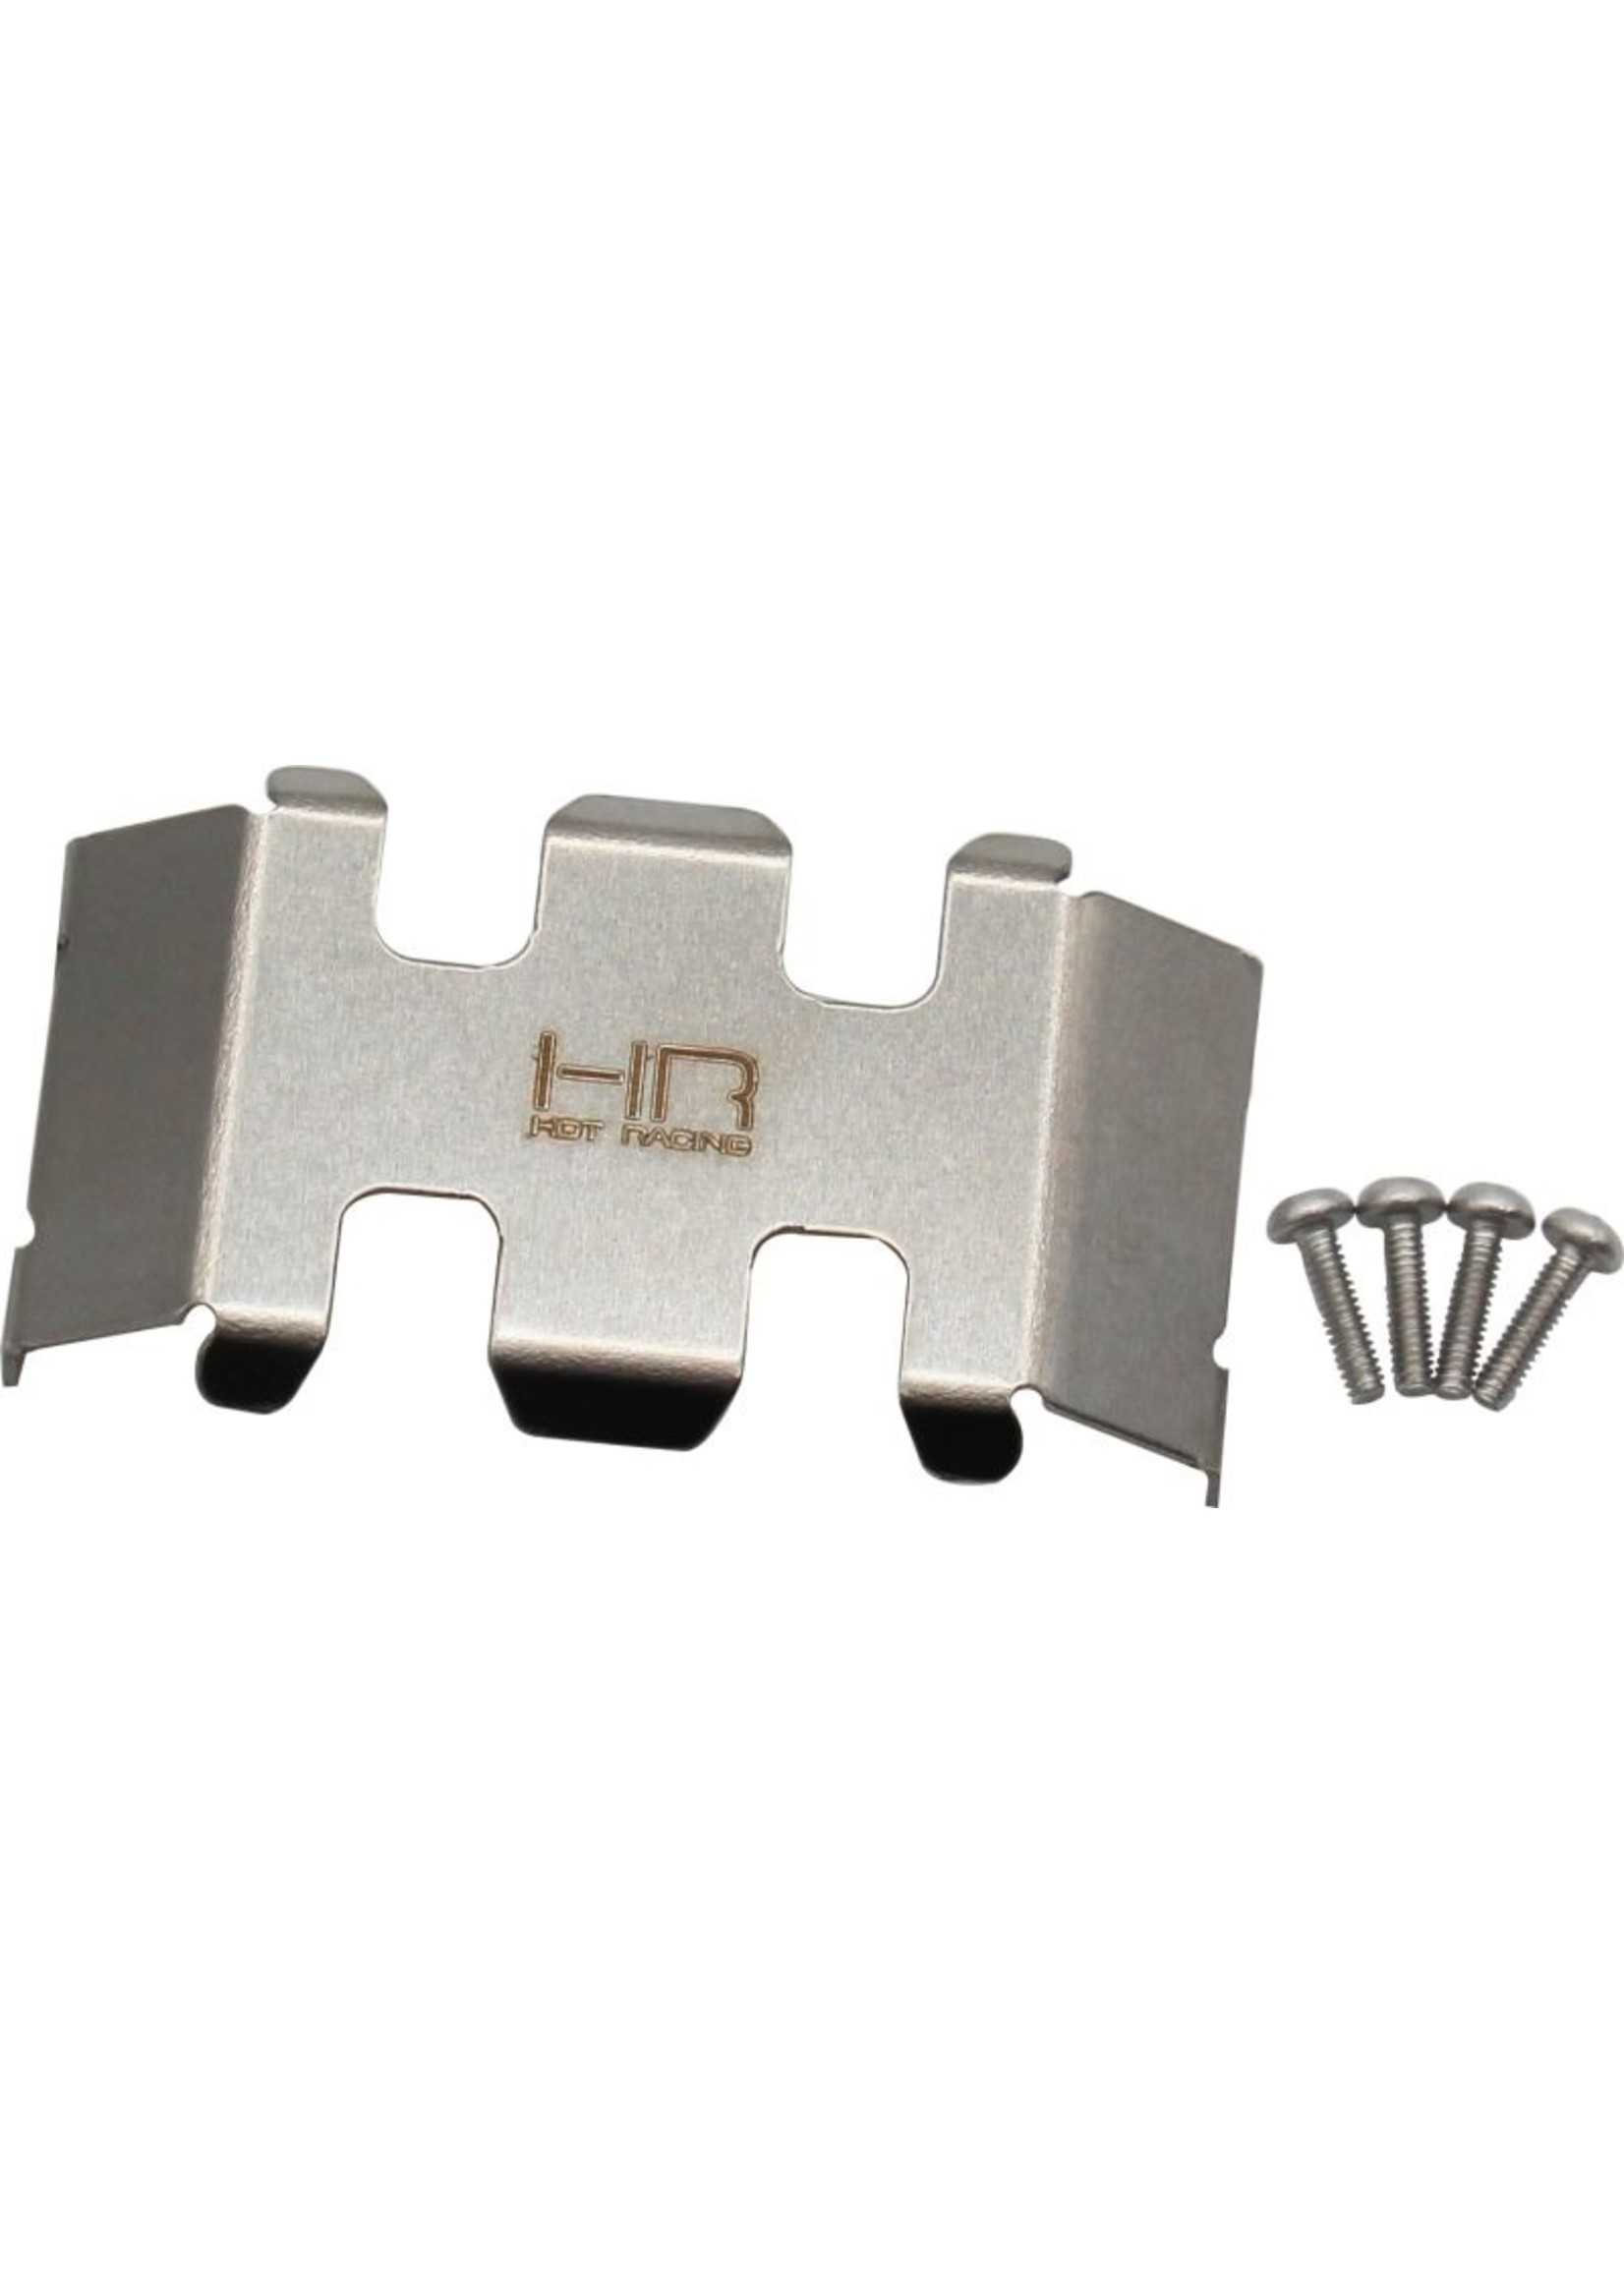 Hot Racing HRASXTF332C - Stainless Steel Center Belly Skid Plate for Axial SCX24